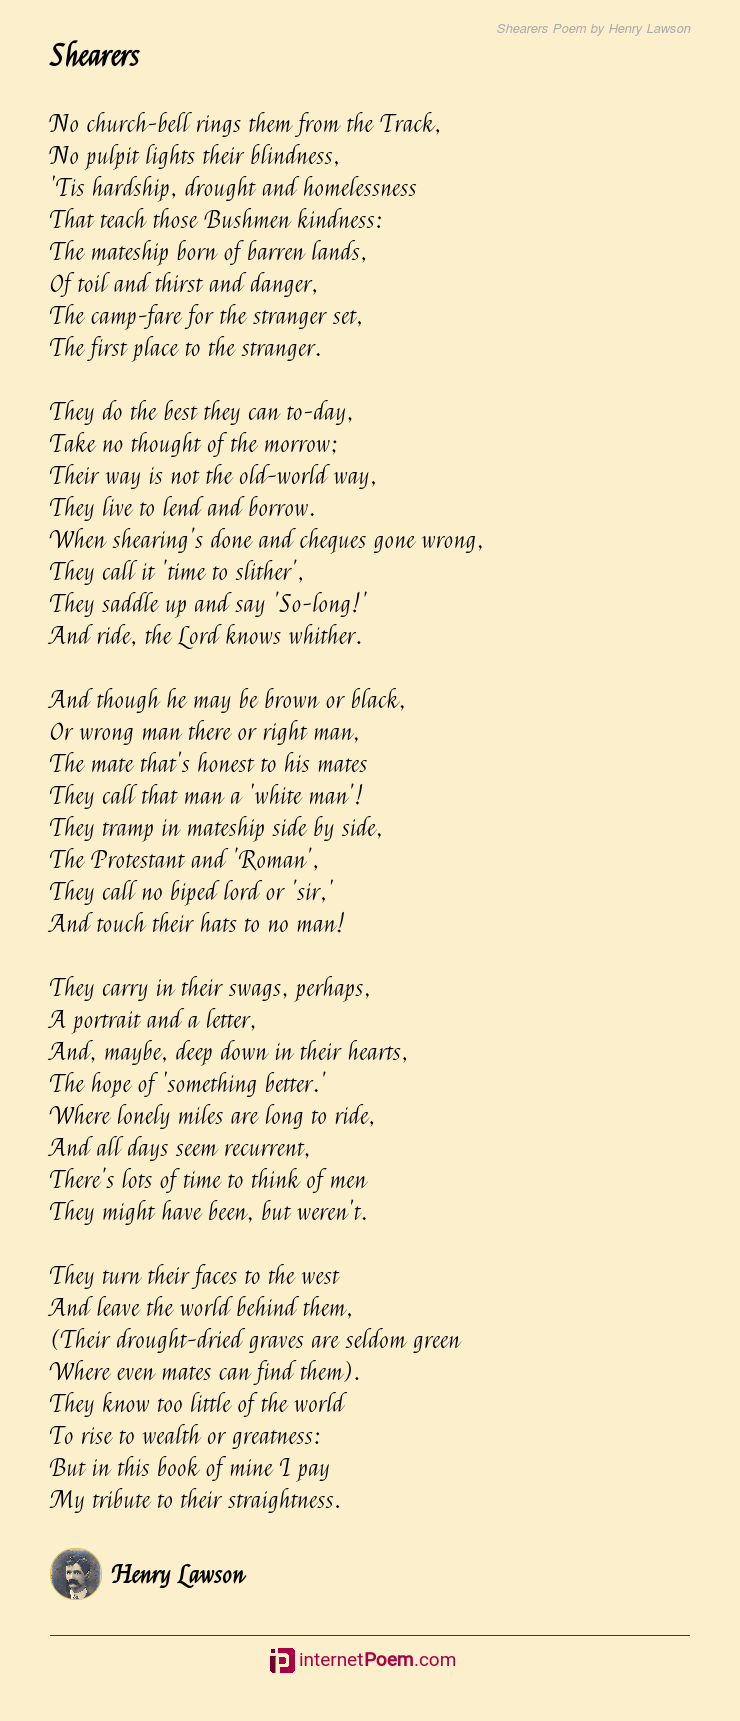 Shearers Poem by Henry Lawson